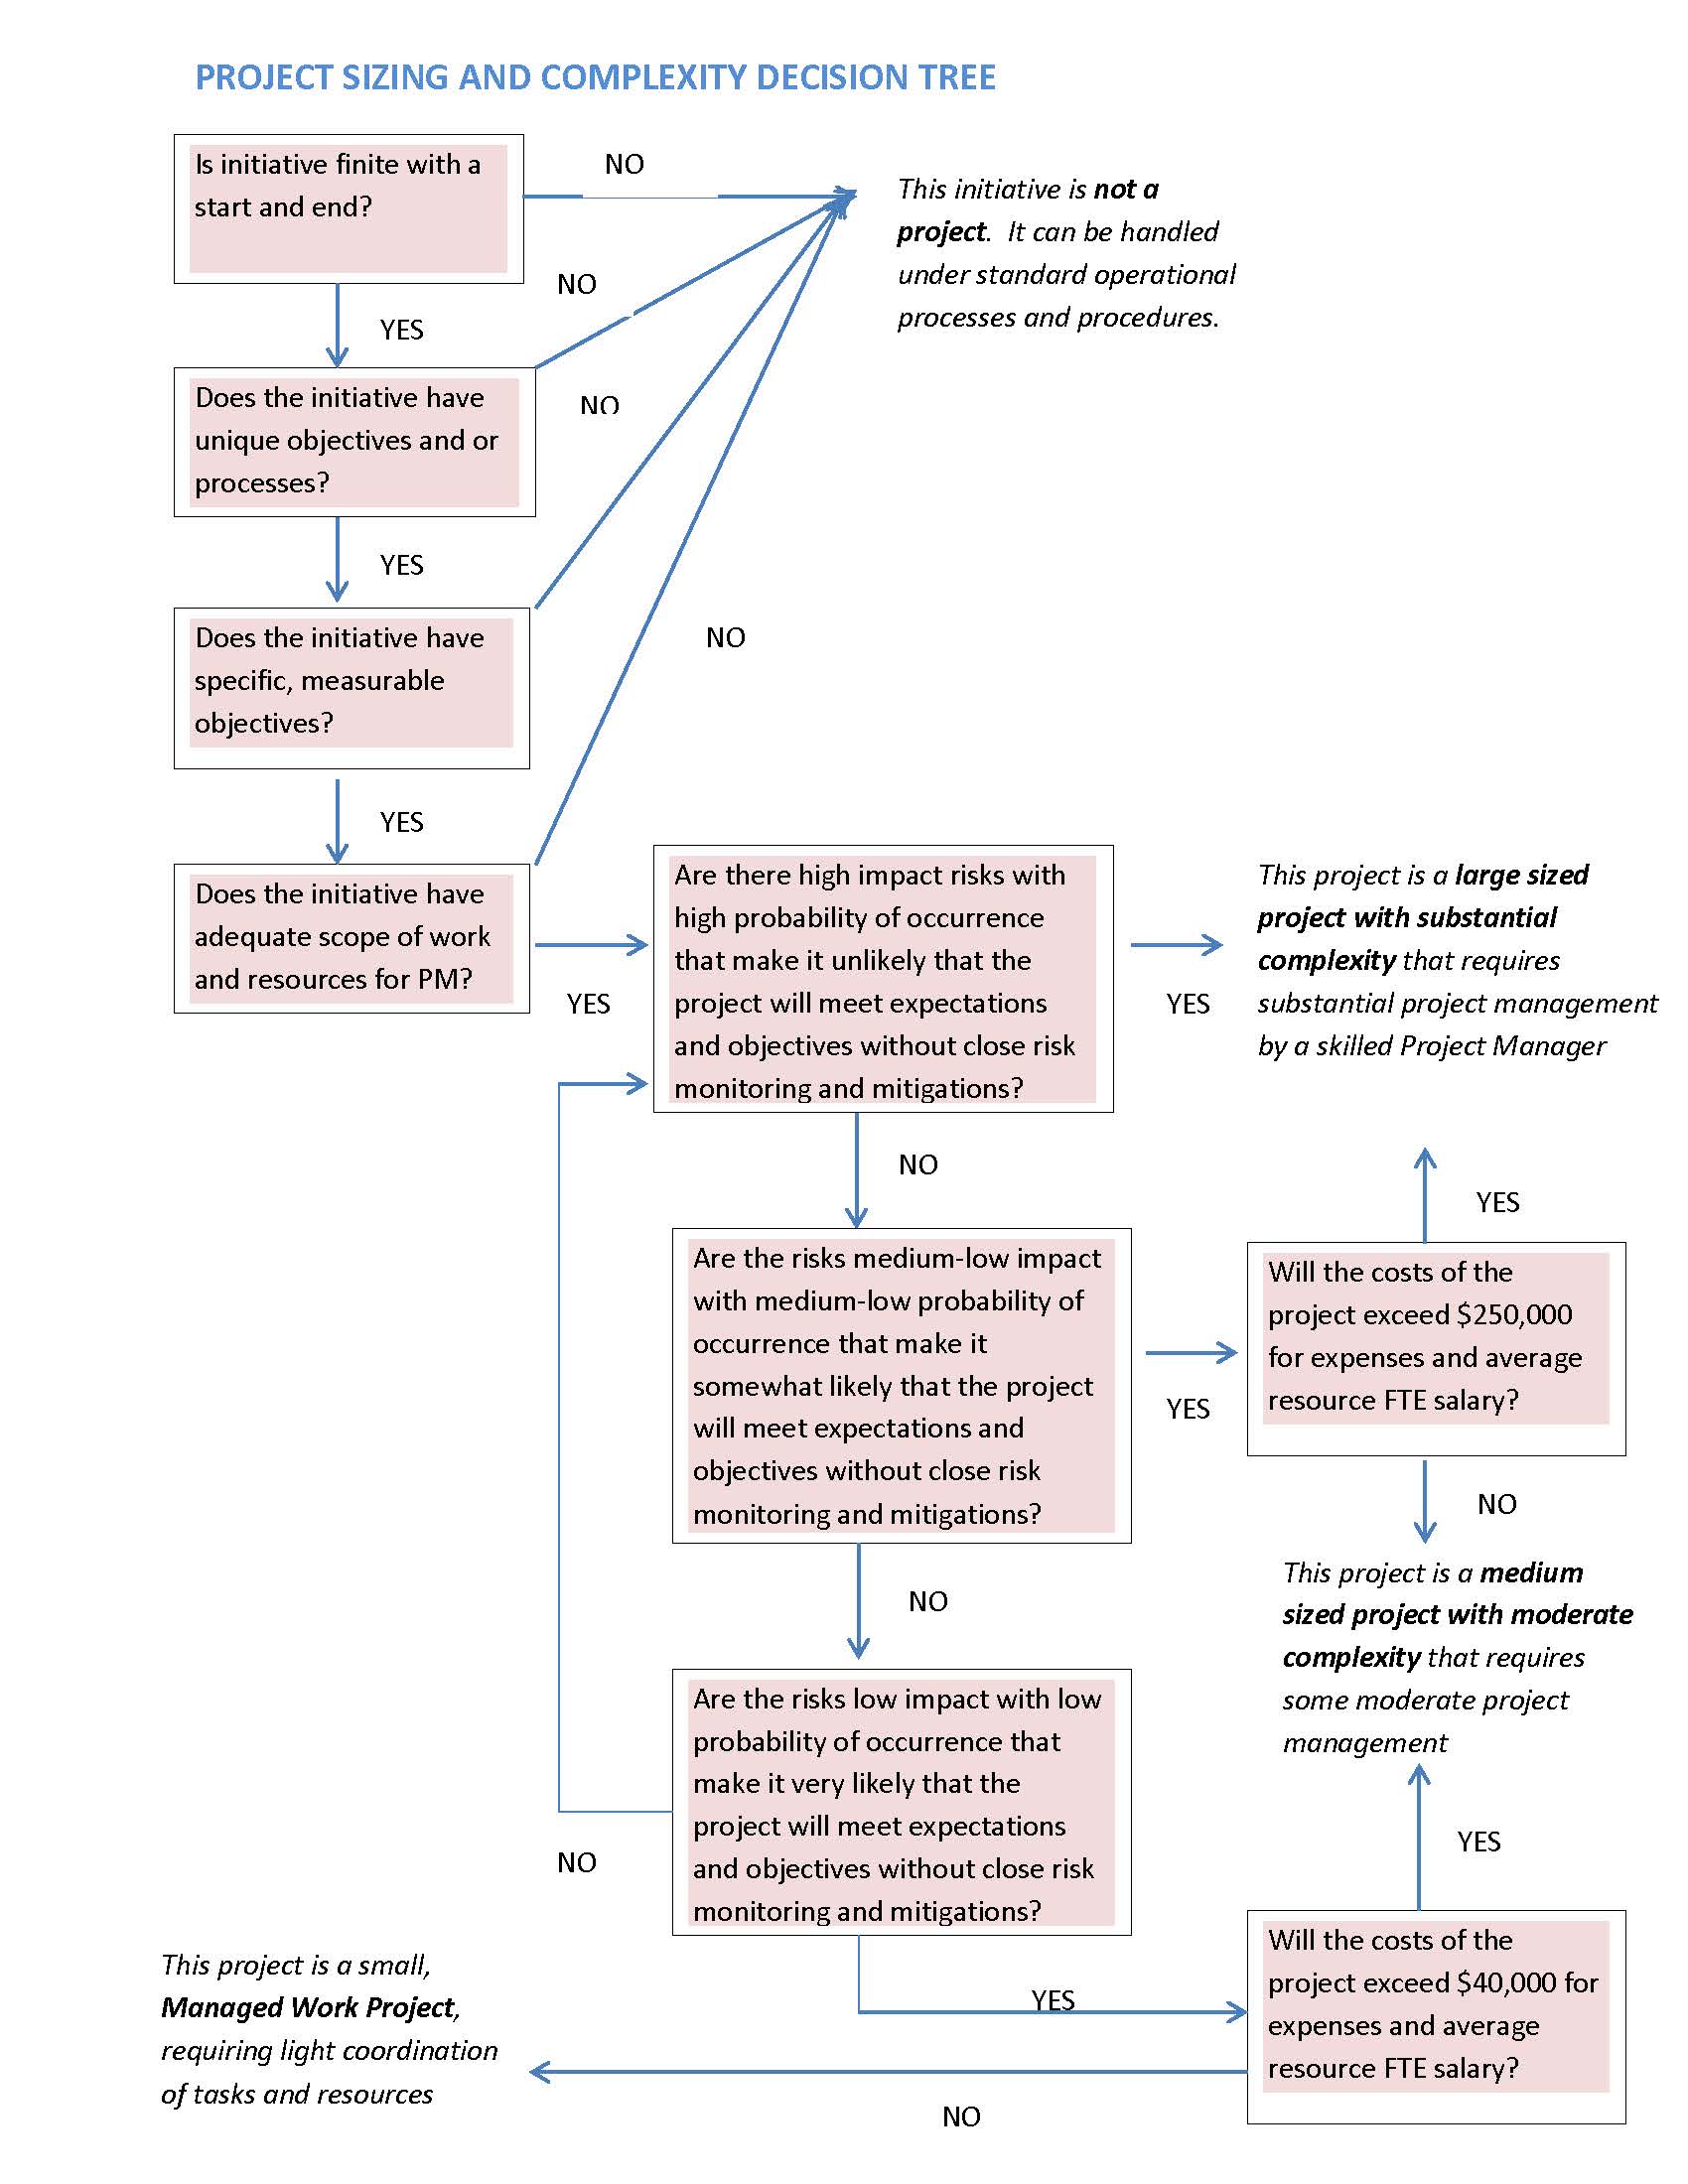 Project sizing and complexity decision tree